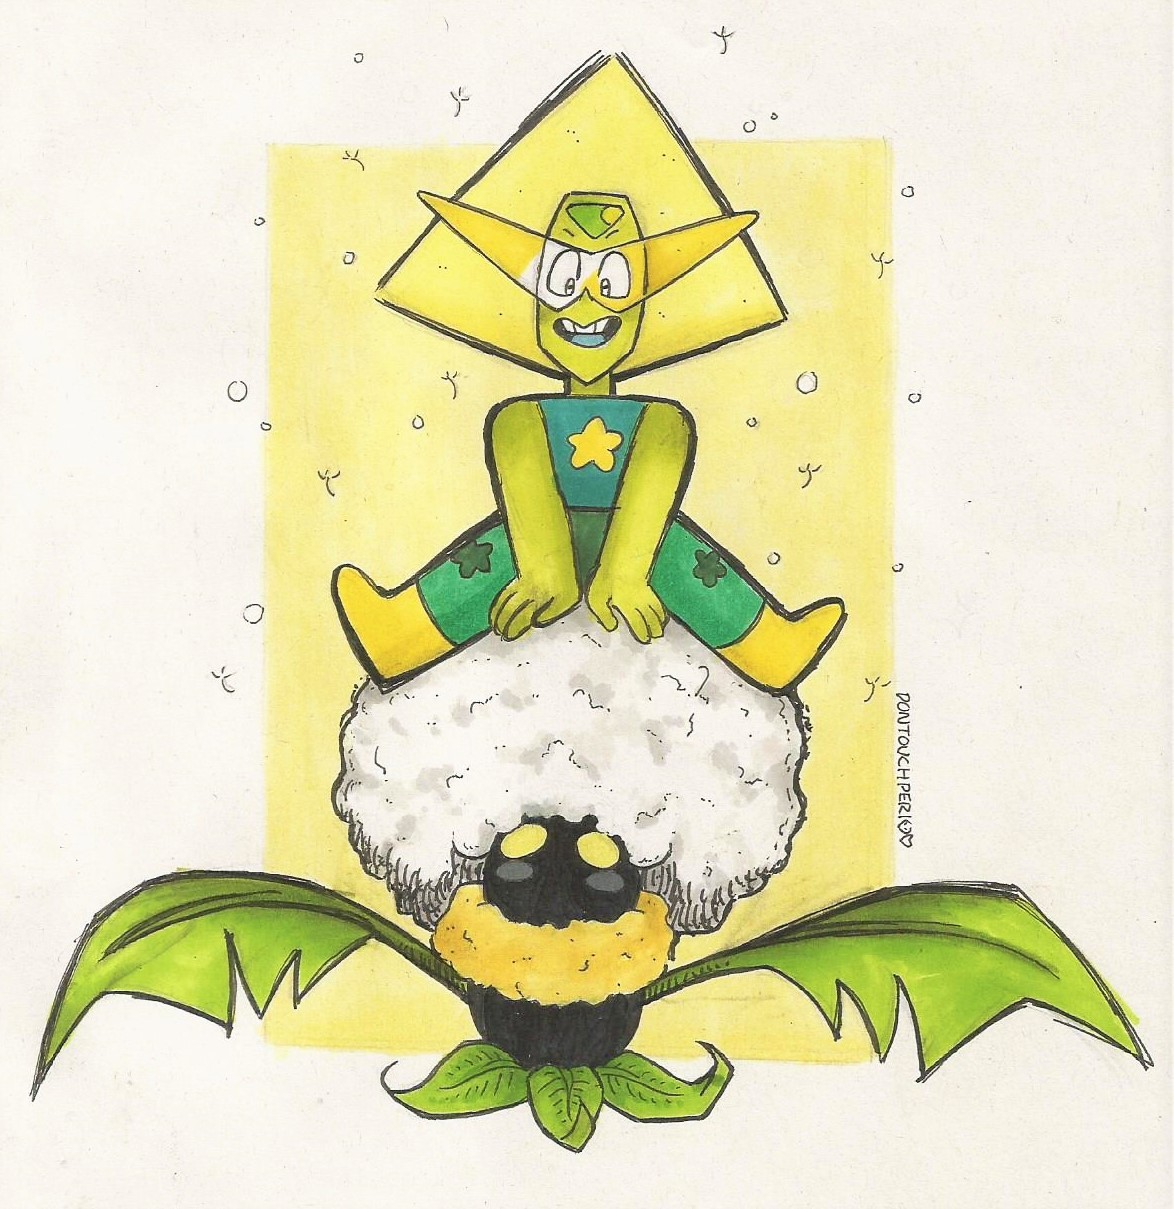 The Dandelion Heartless from the Tangled world is really cute and I felt the urge to draw Peridot with it. Also they looked like they could be used as icons so fskjsfhkjfshf